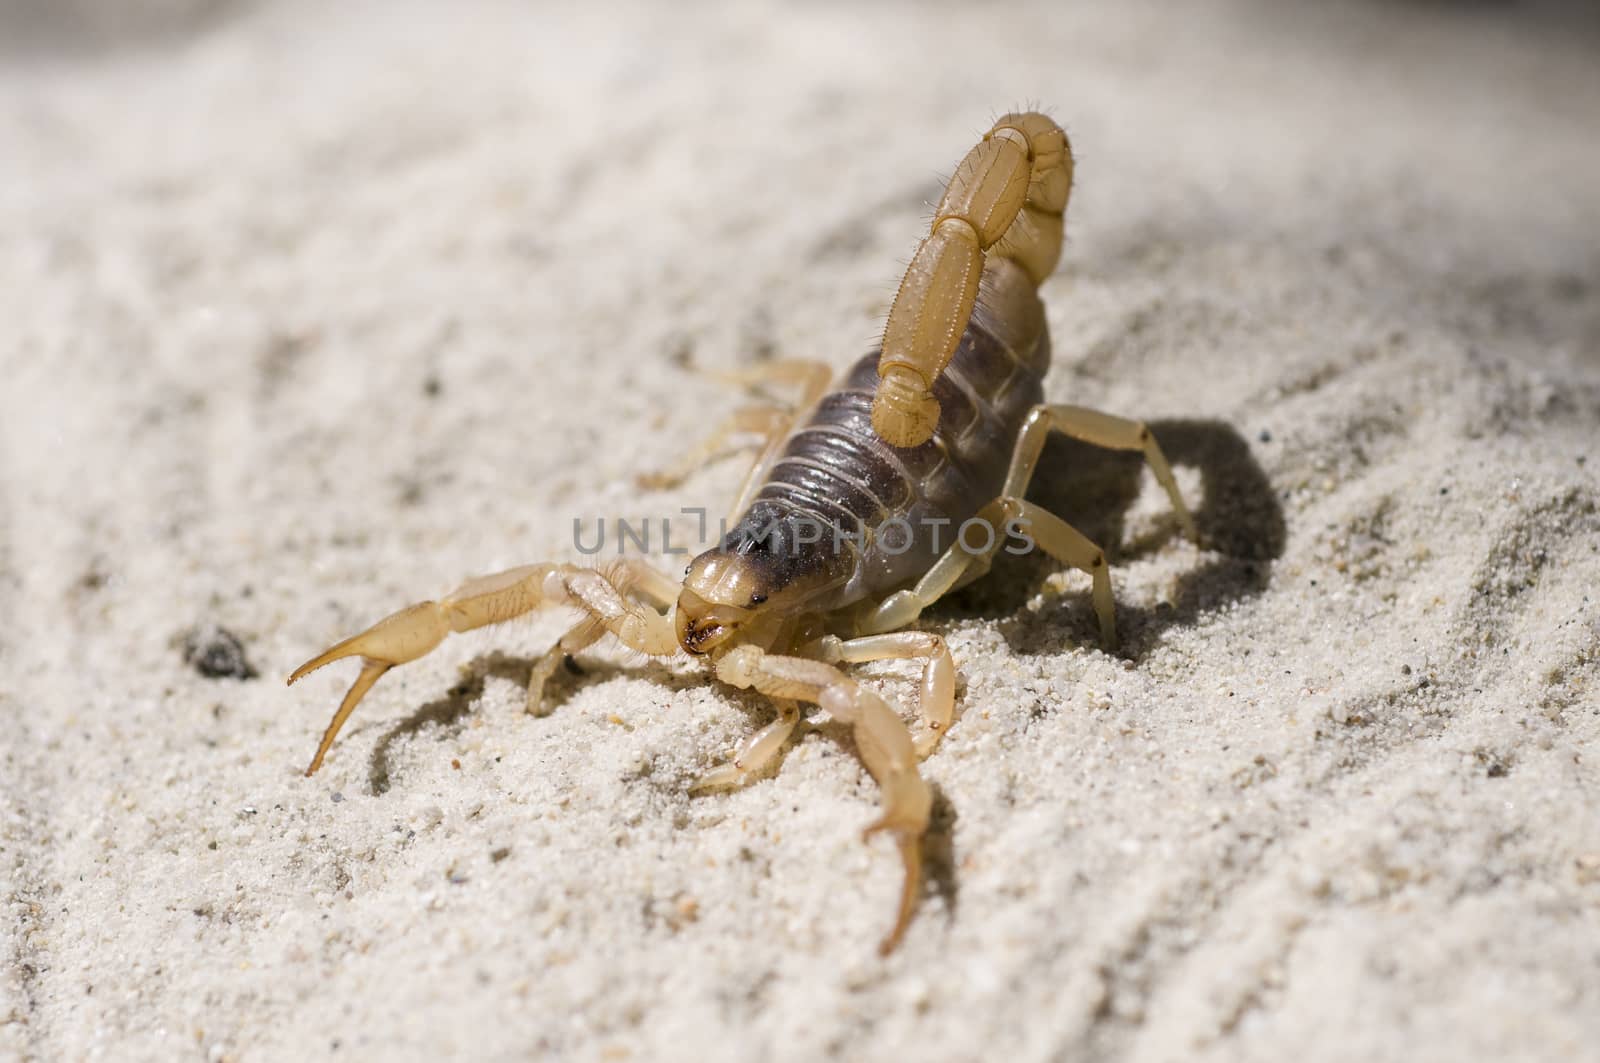 Scorpion on sand by Njean